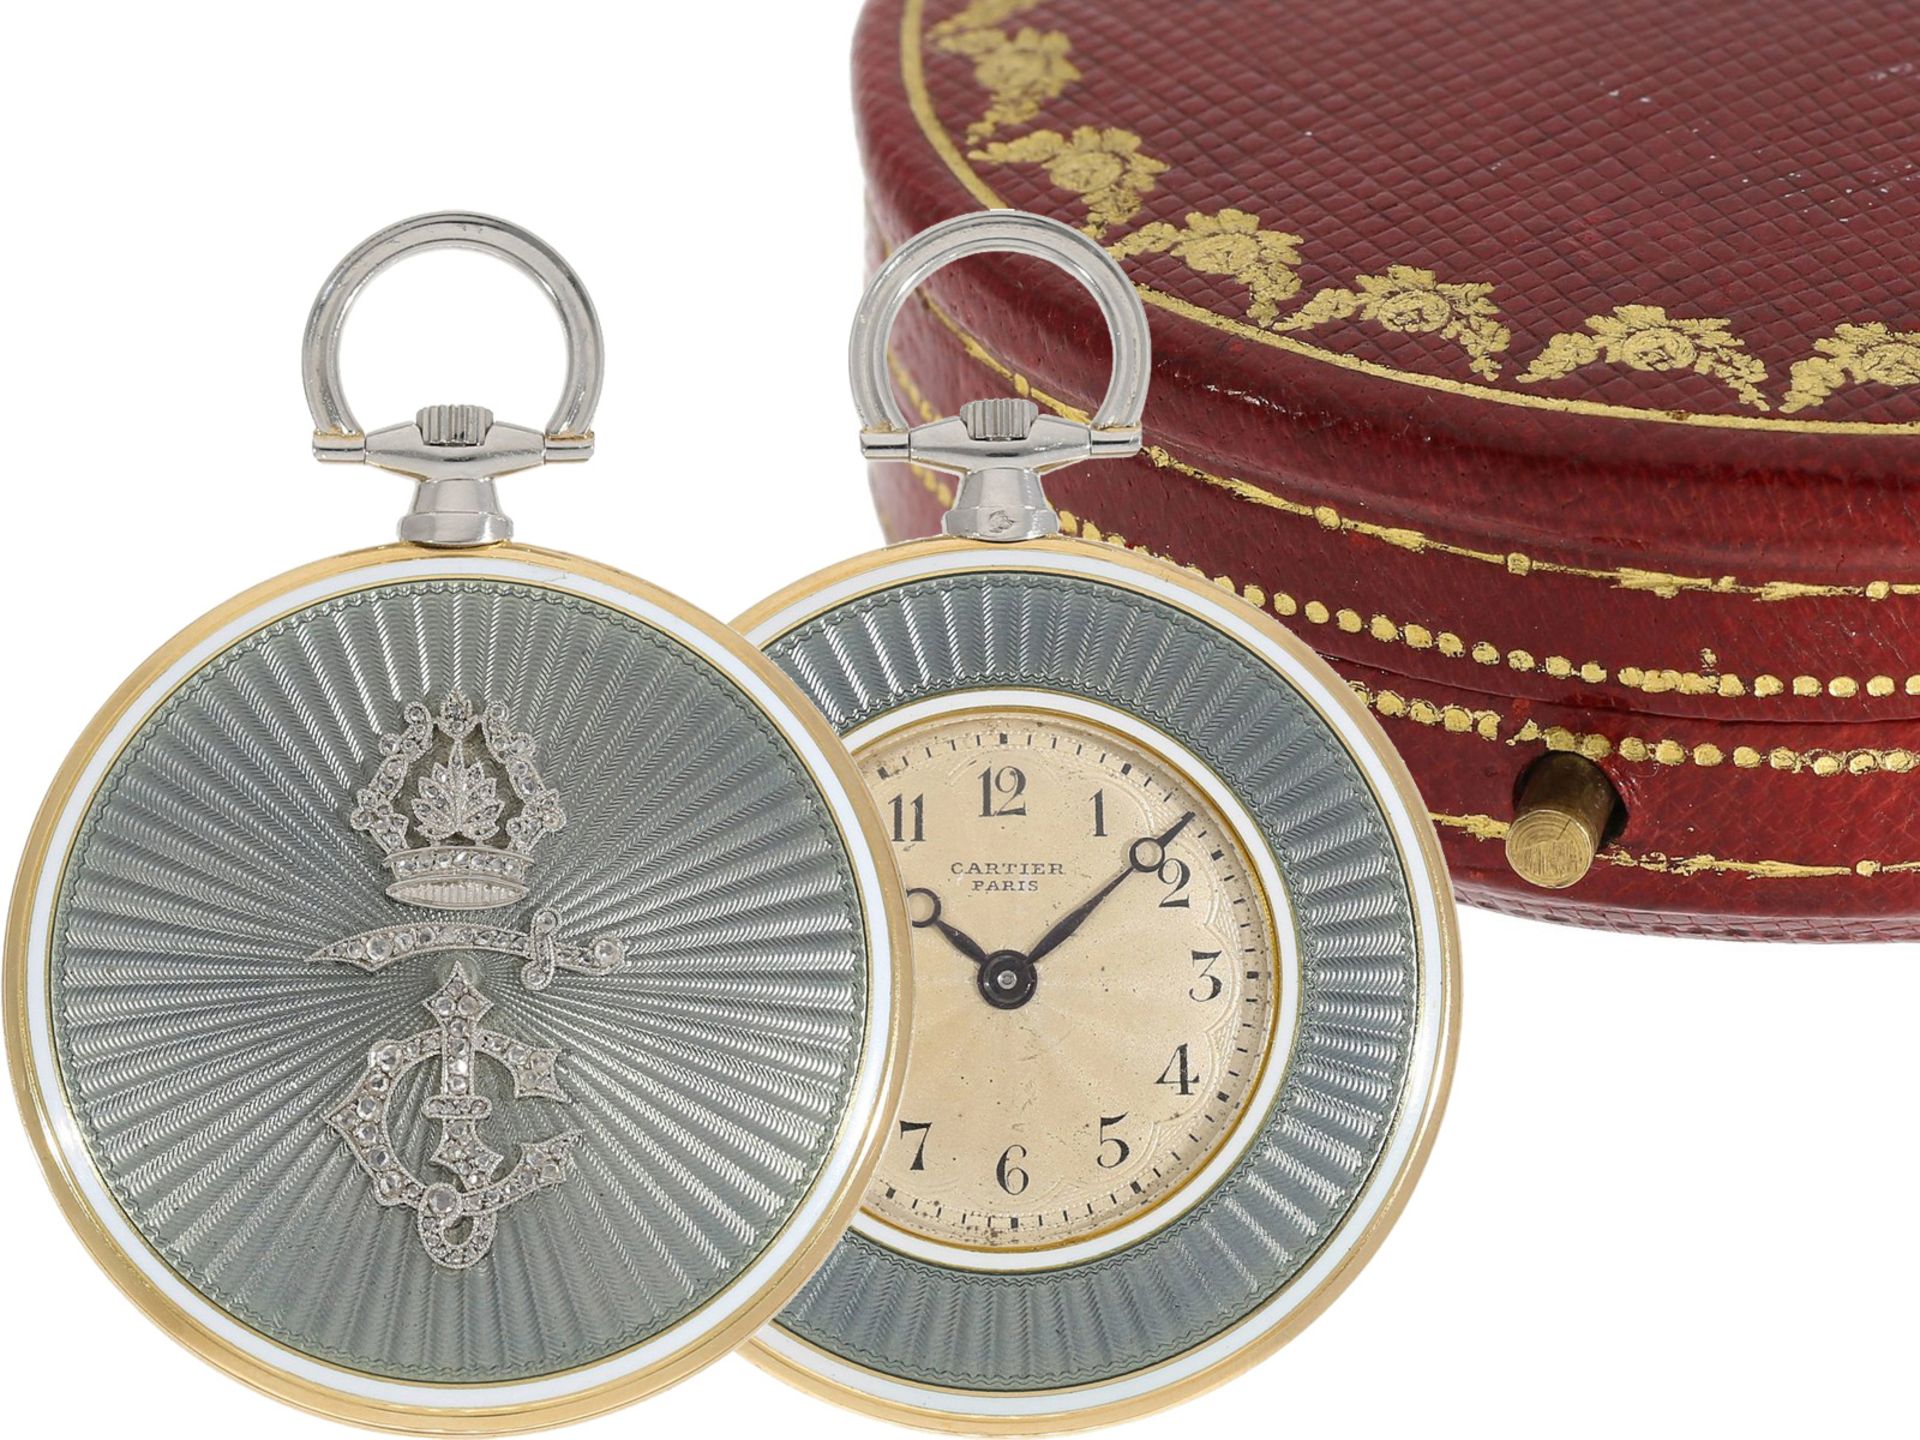 Pocket watch: unique, historically important Cartier pocket watch with original box, gift of the